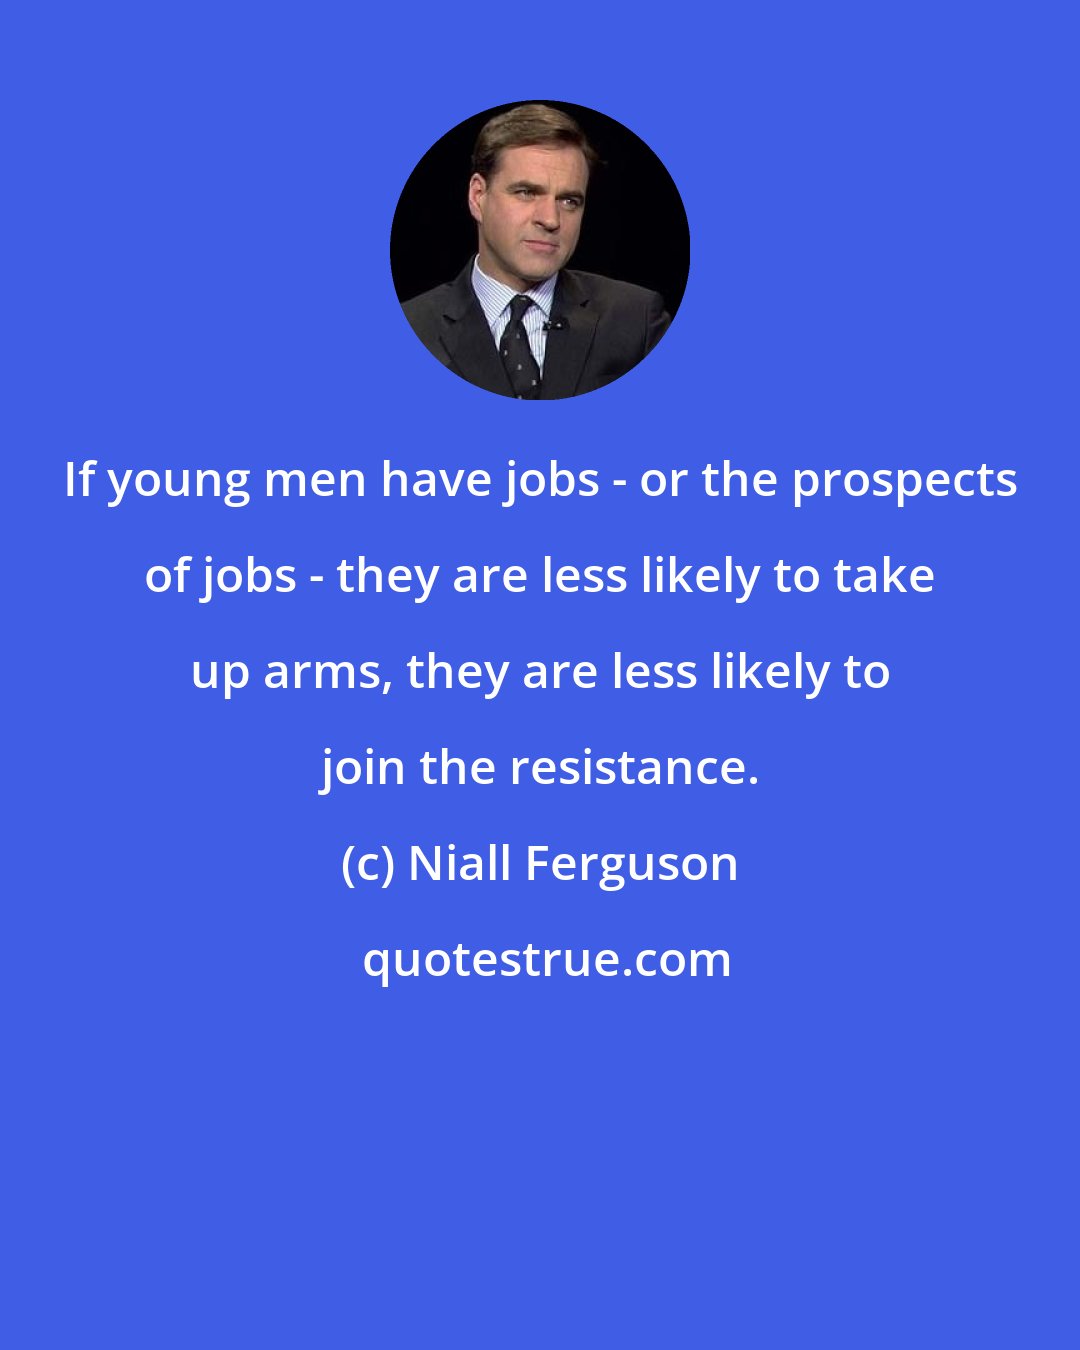 Niall Ferguson: If young men have jobs - or the prospects of jobs - they are less likely to take up arms, they are less likely to join the resistance.